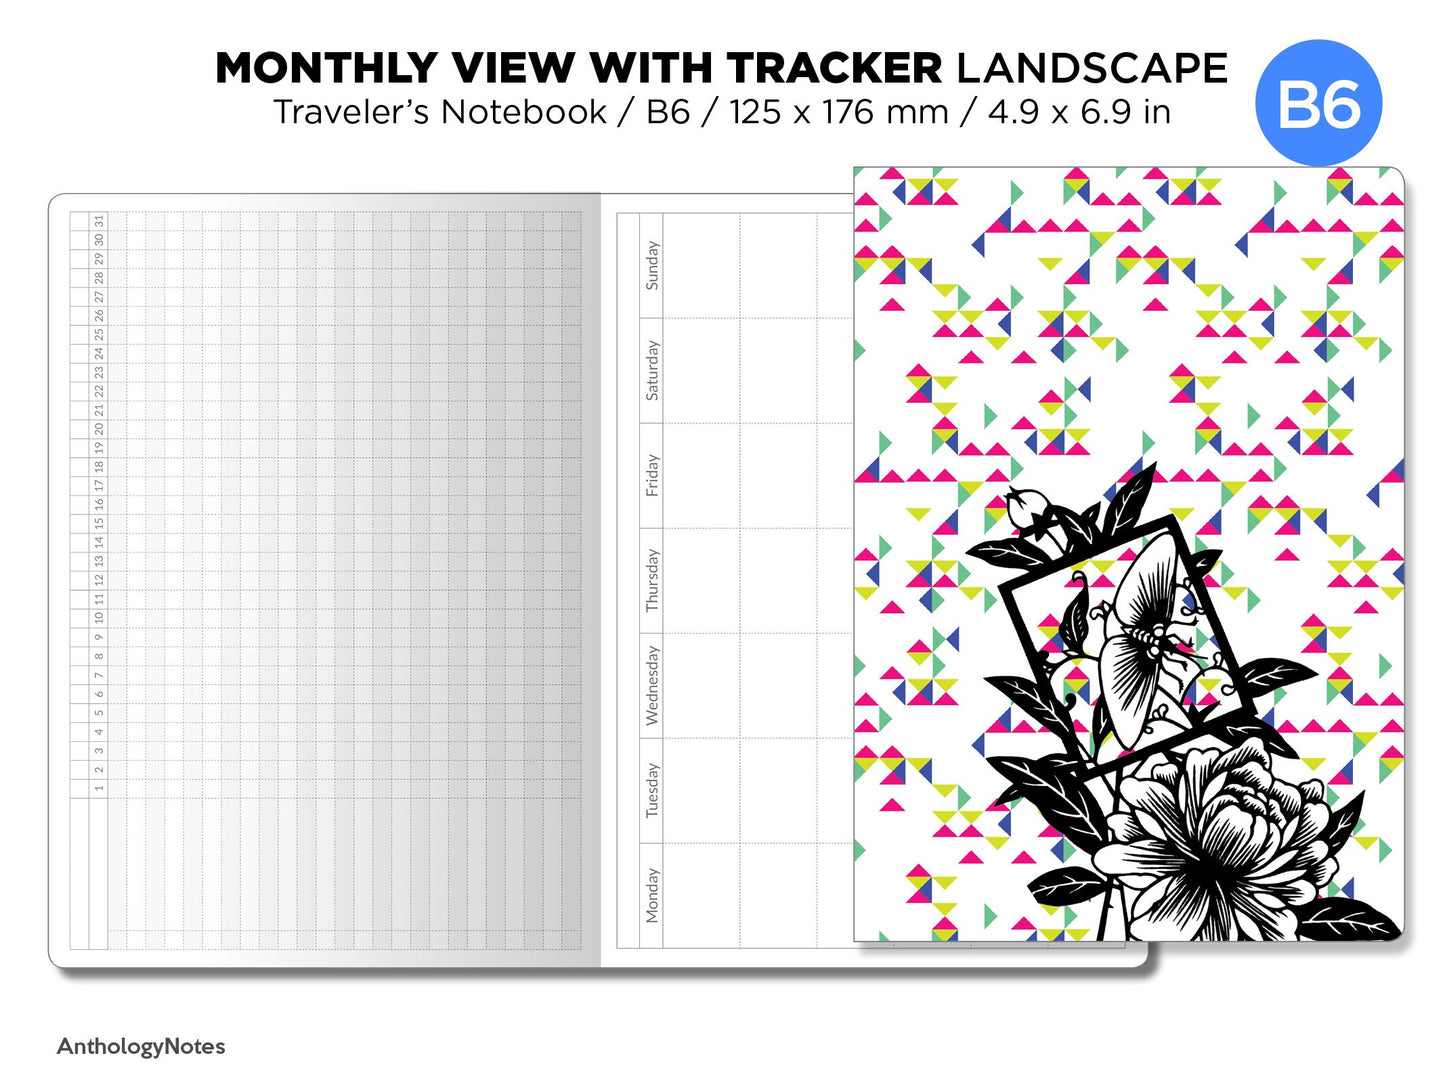 B6 Classic Monthly View TRACKER Landscape Format Traveler's Notebook Printable Insert - Minimalist